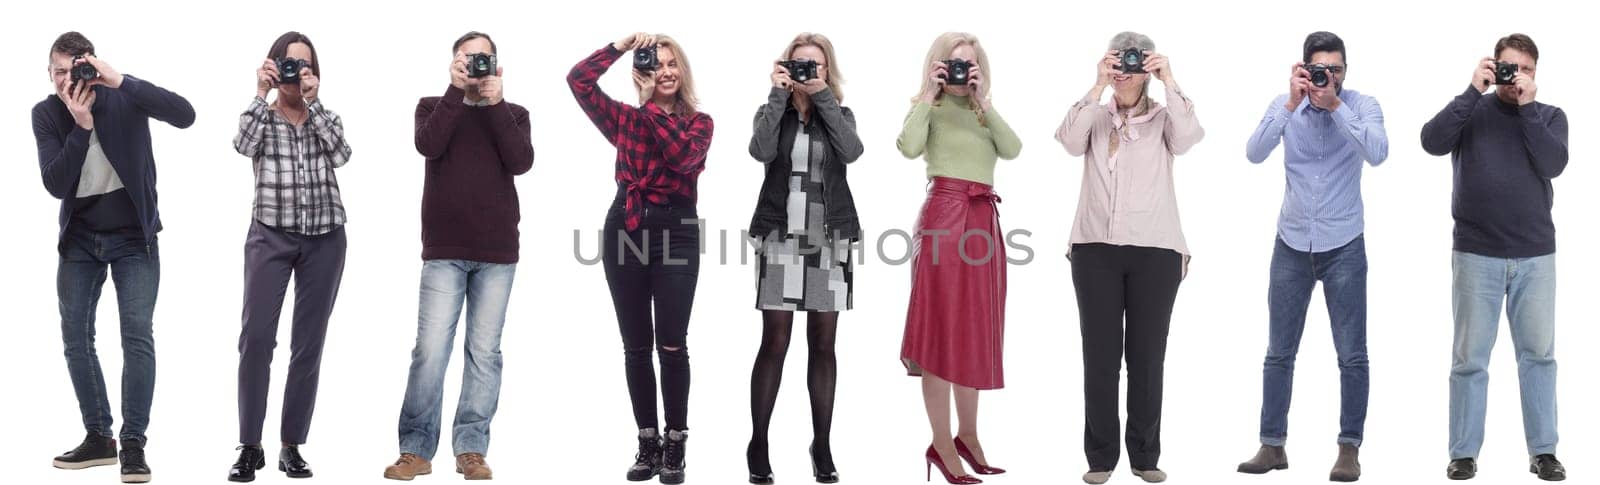 Many Double Twelve Group paparazzi photographers with cameras by asdf